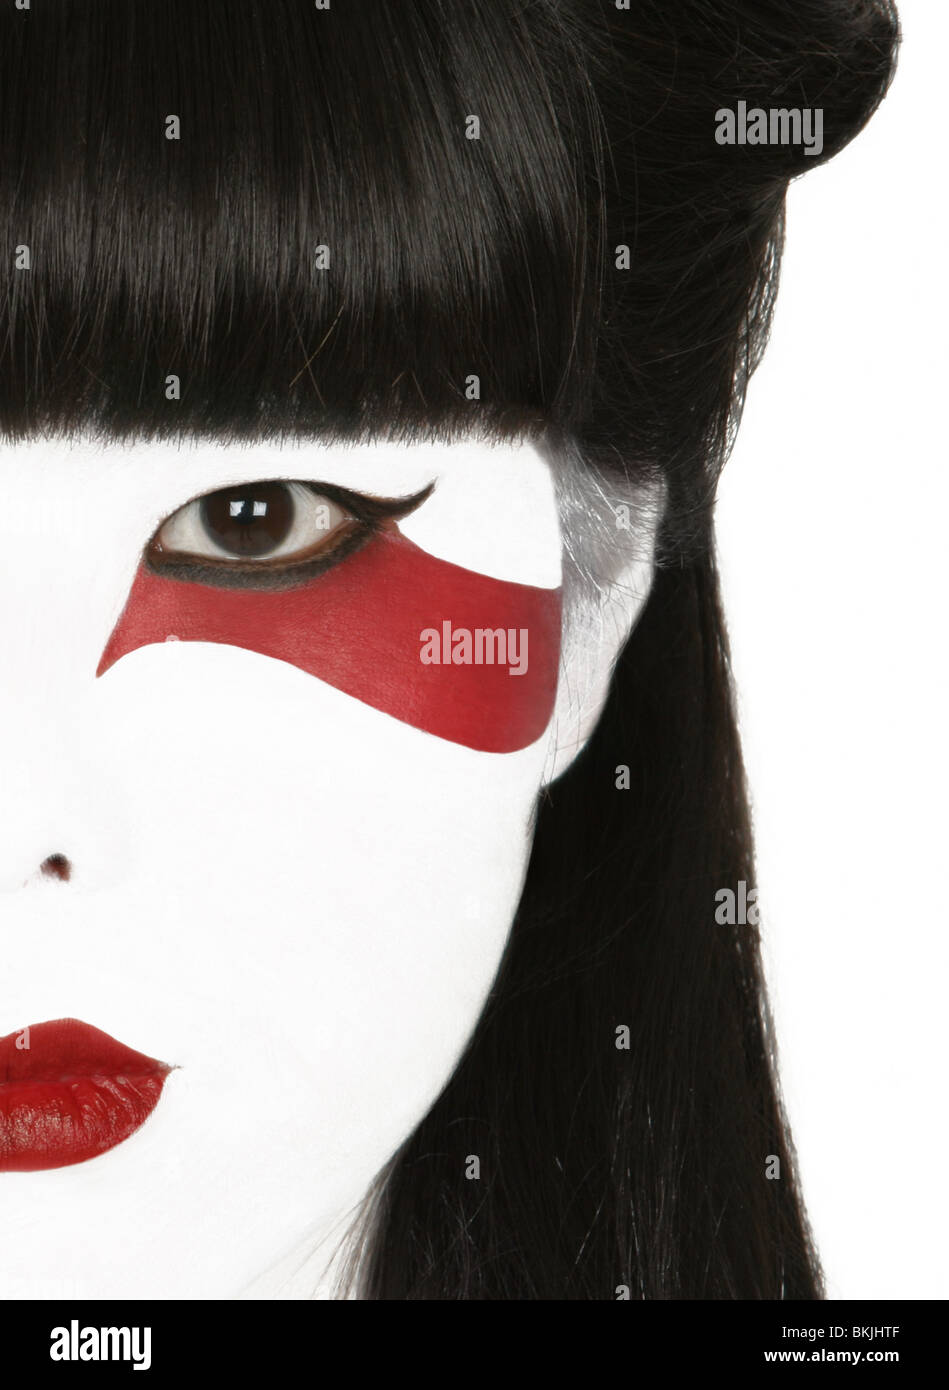 A high key photograph of a Japanese girl's face with geisha style make up  and a stylised red stripe under her left eye Stock Photo - Alamy